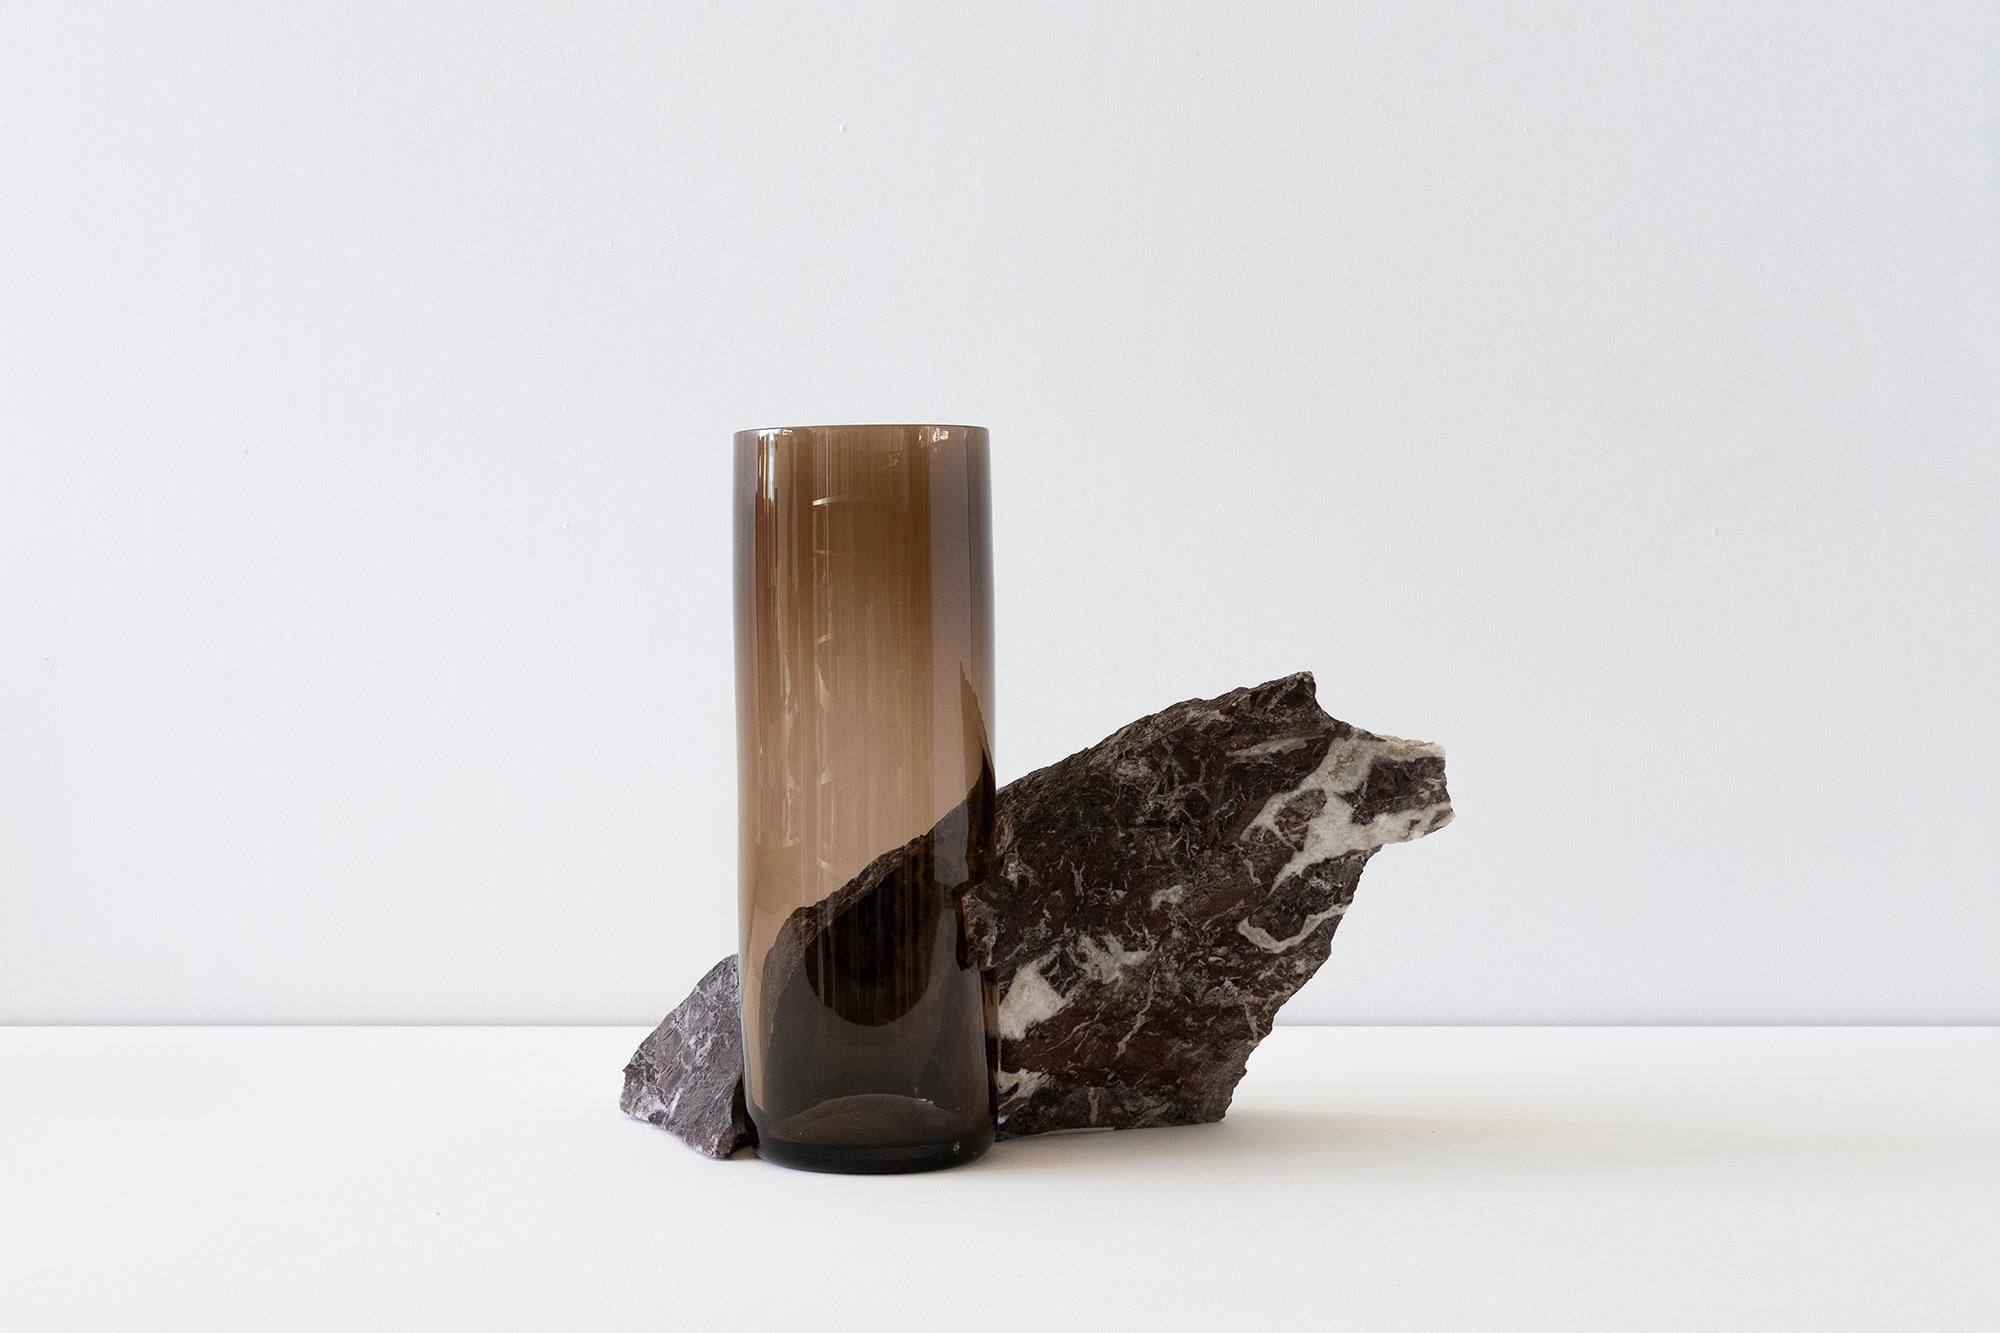 Drill vases

Part chaos and part control, drill vases are an exercise in
improvisation.  

The origin of the project lies in Carrara, and the small fragments of
marble found discarded by quarries in the region. I began to collect
these